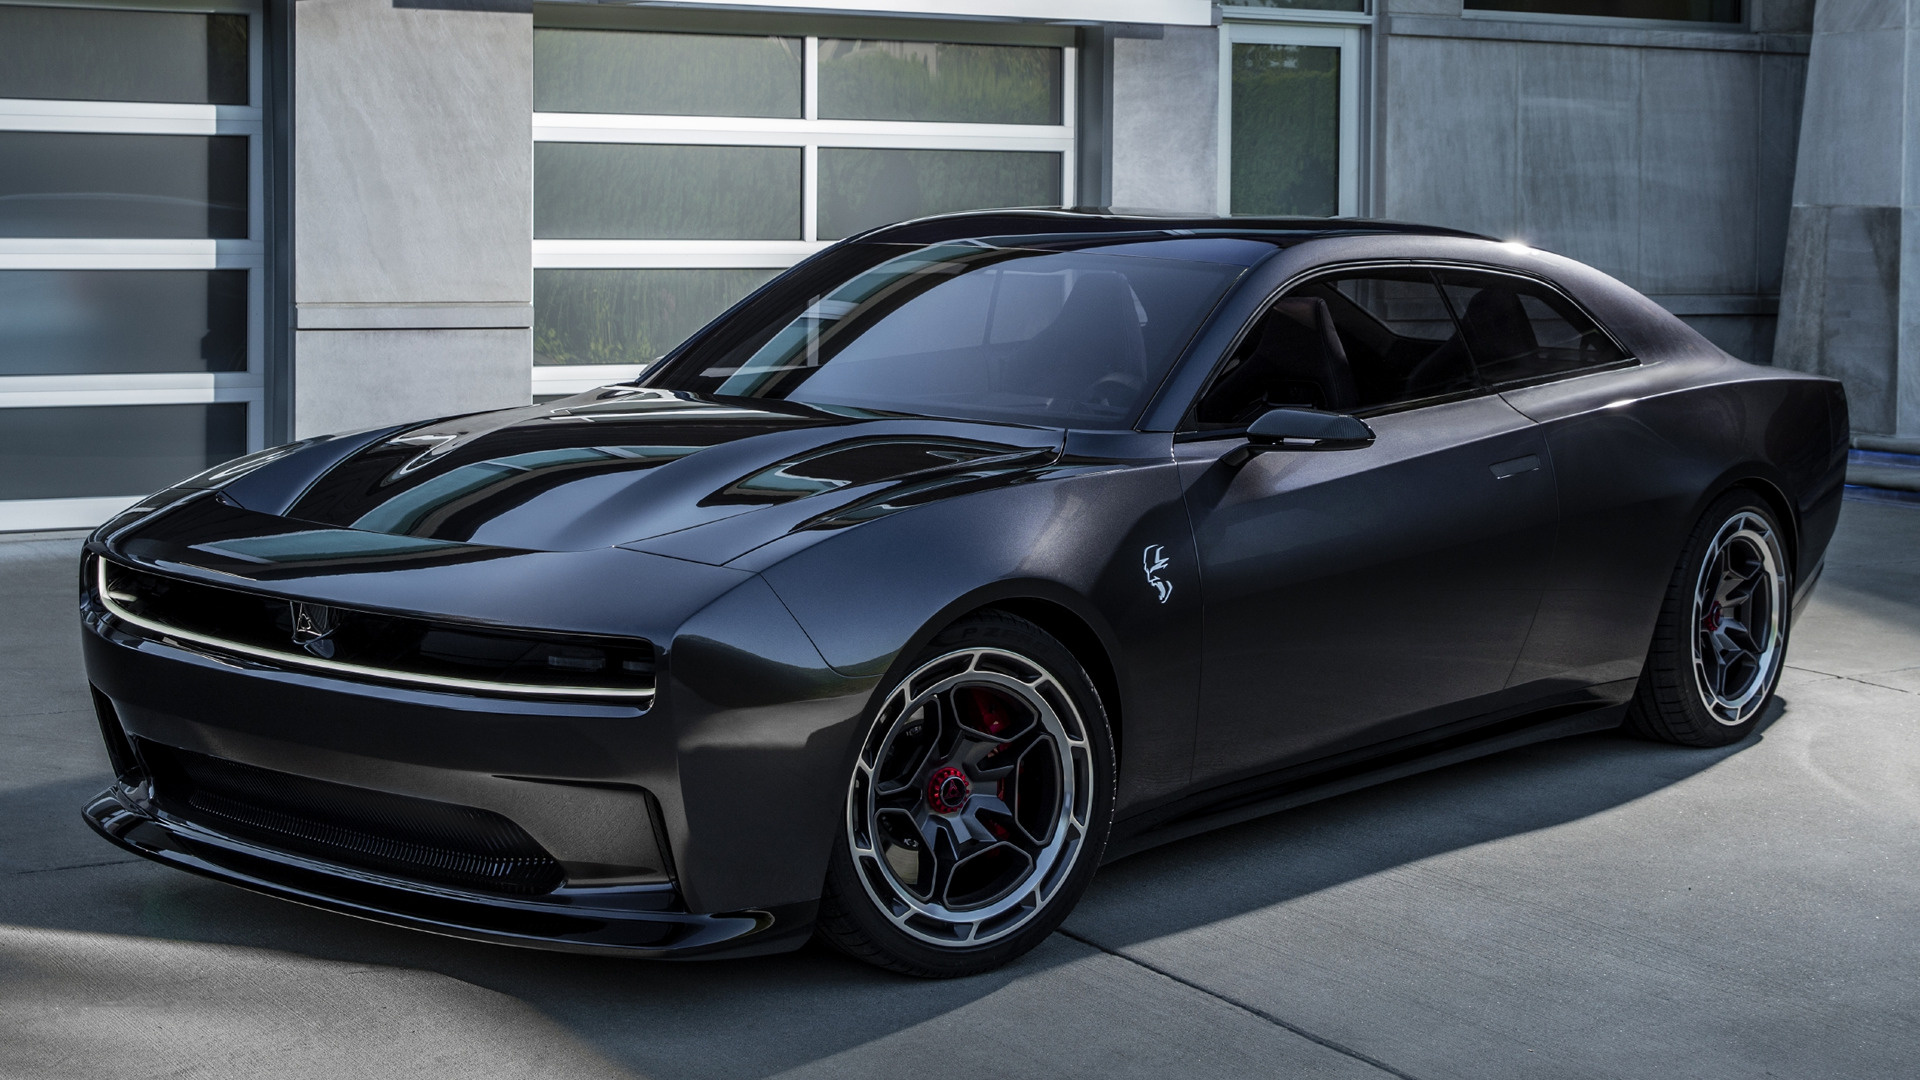 2022 Dodge Charger Daytona Srt Concept Wallpapers And Hd Images Car